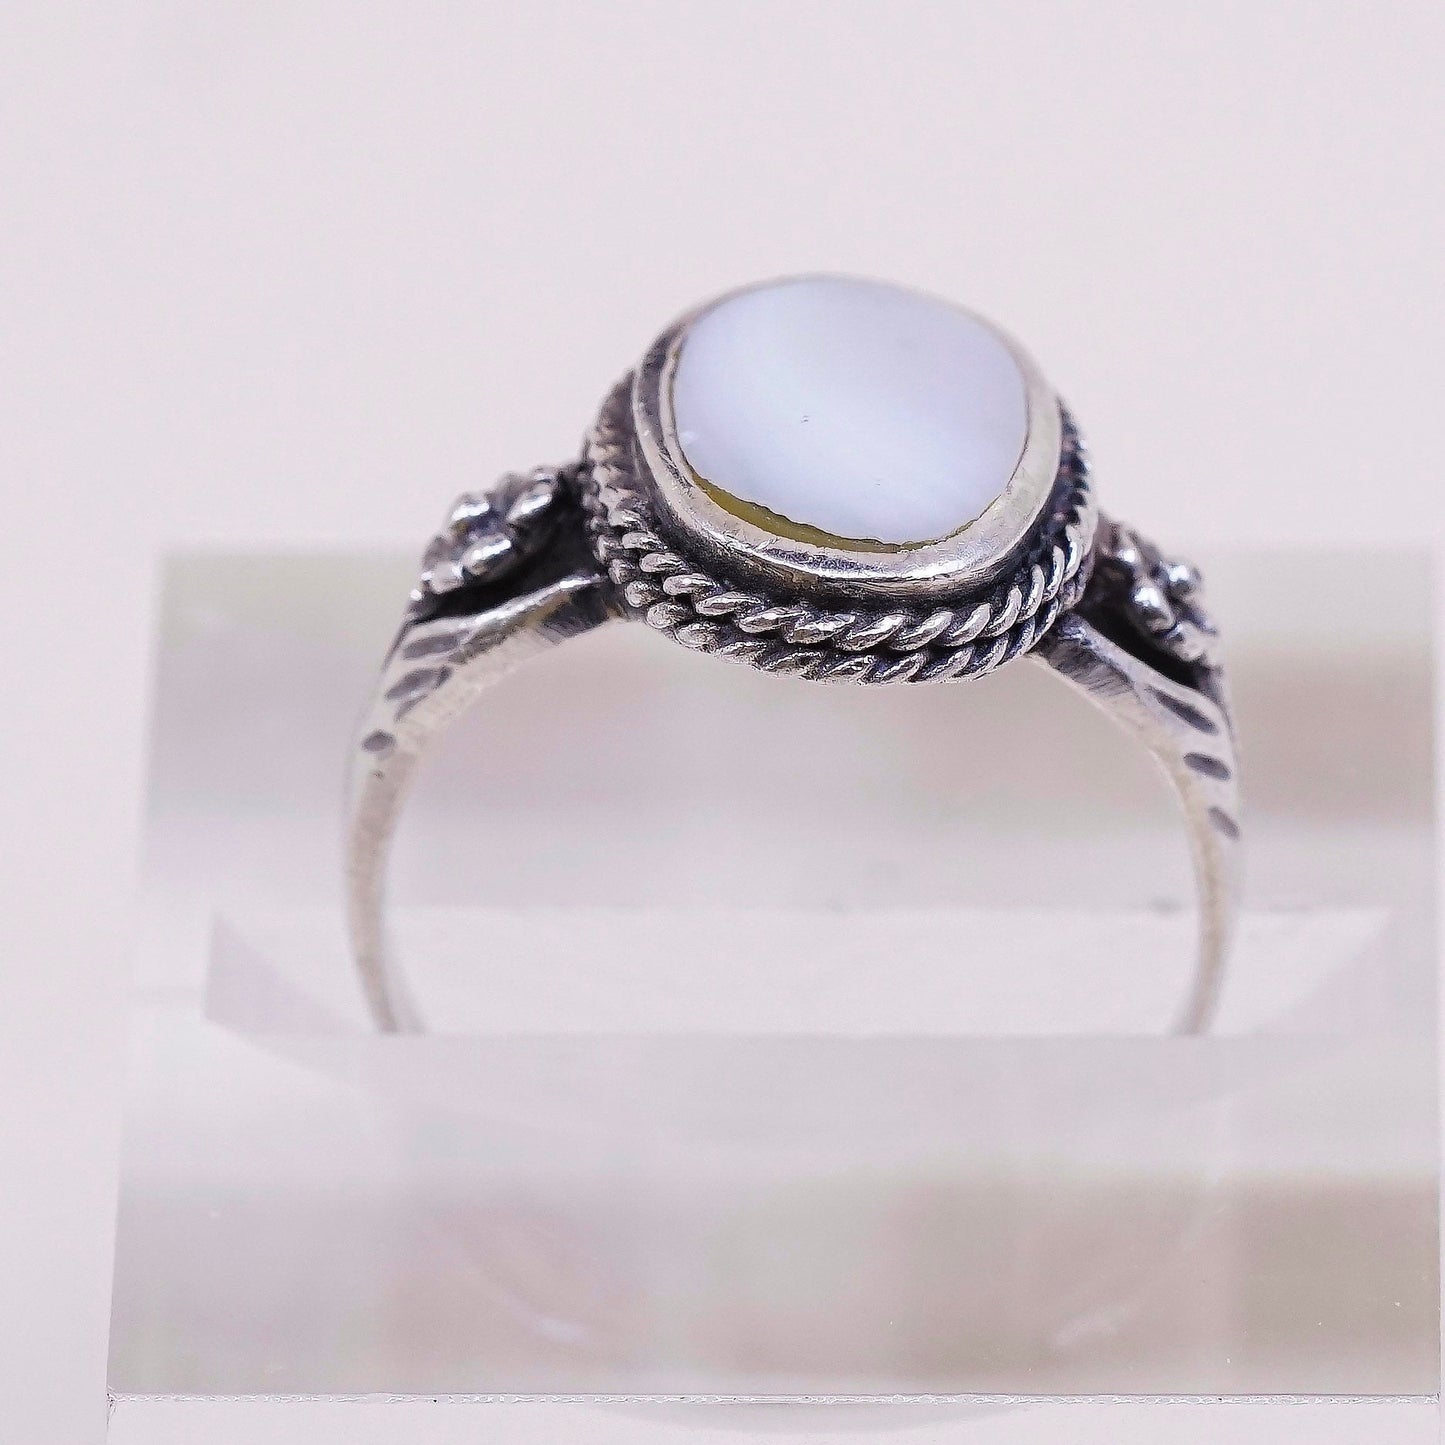 sz 7.75, vtg sterling silver handmade ring, 925 w/ mother of pearl